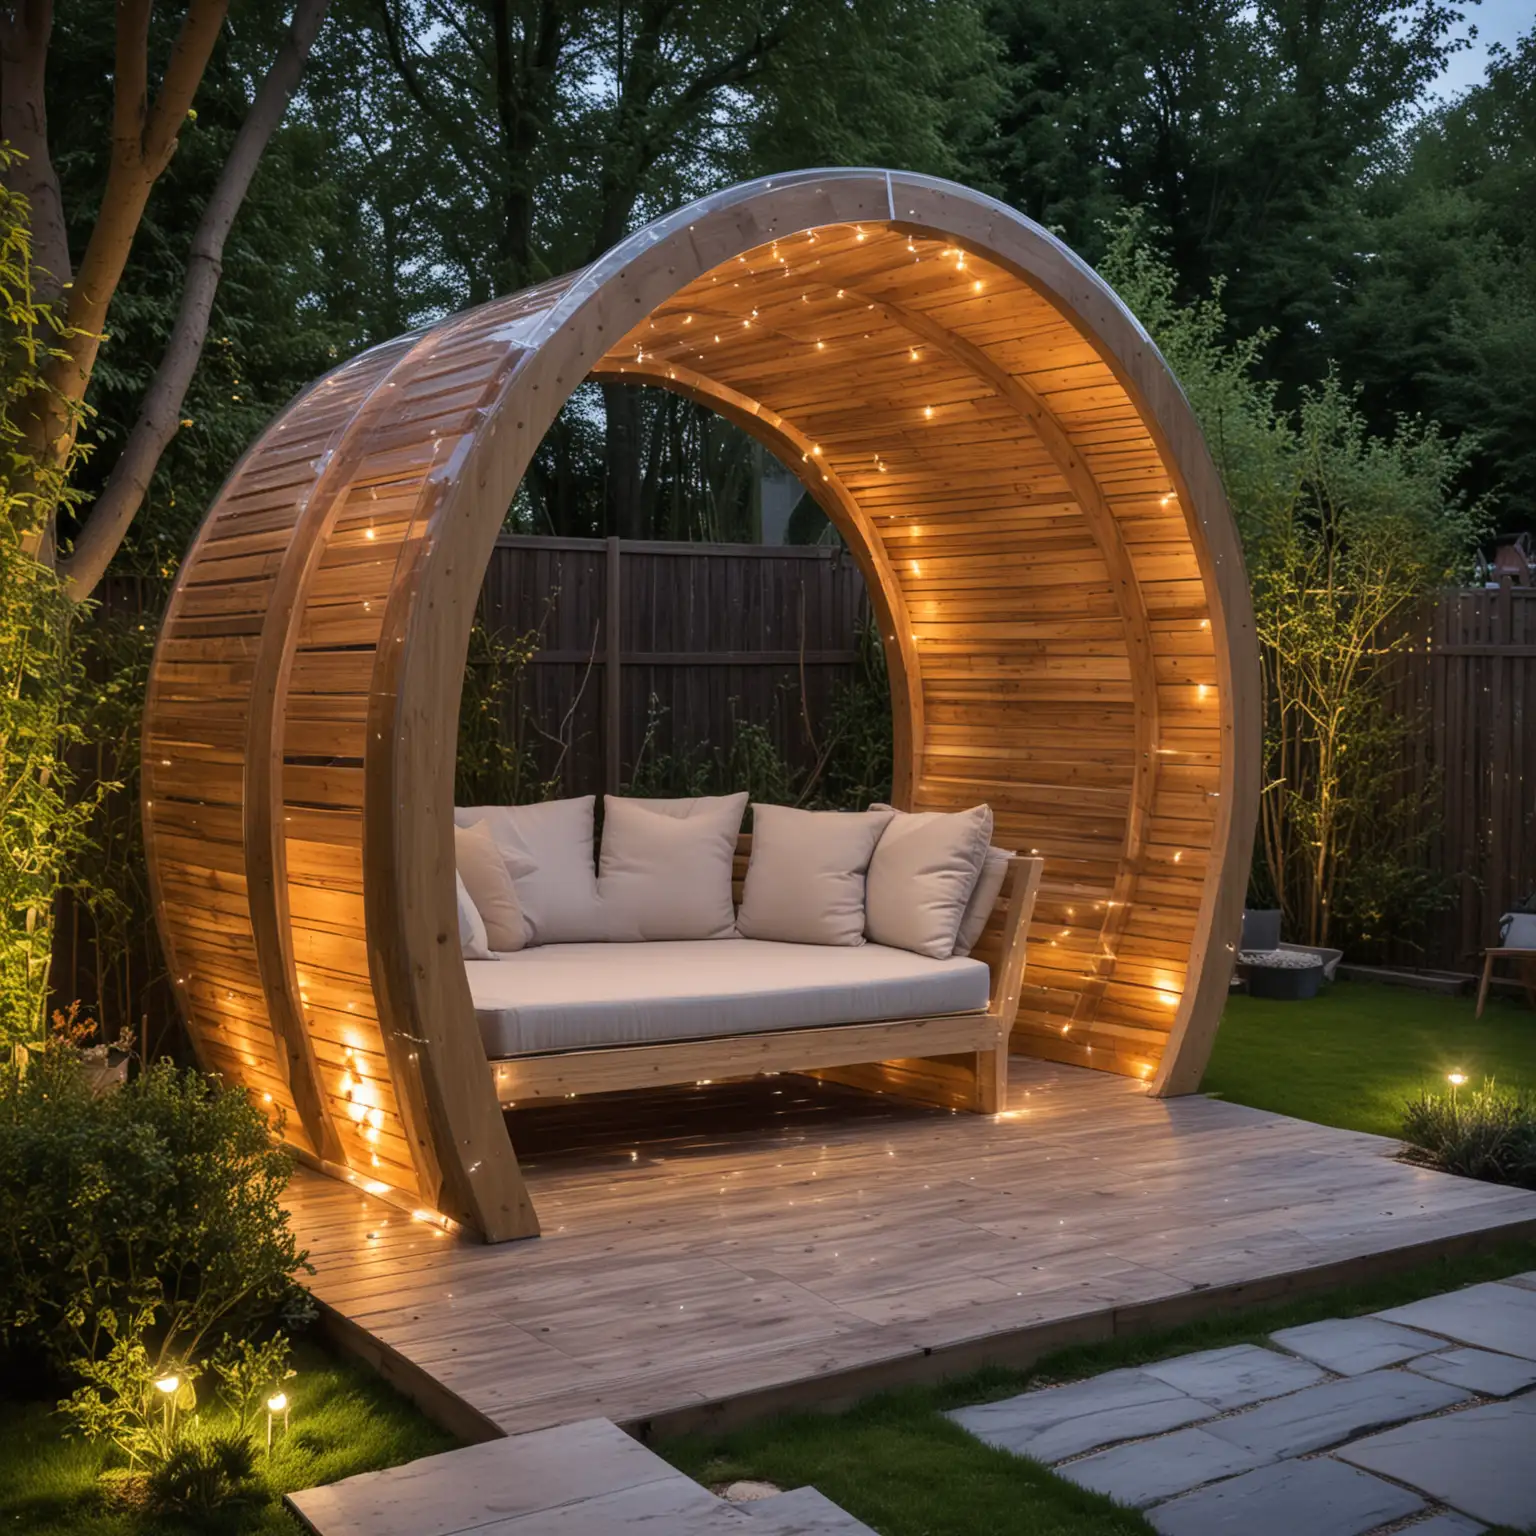 Relaxing in a Glulam Arched Garden Pod with Clear Polycarbonate and Ambient Lighting